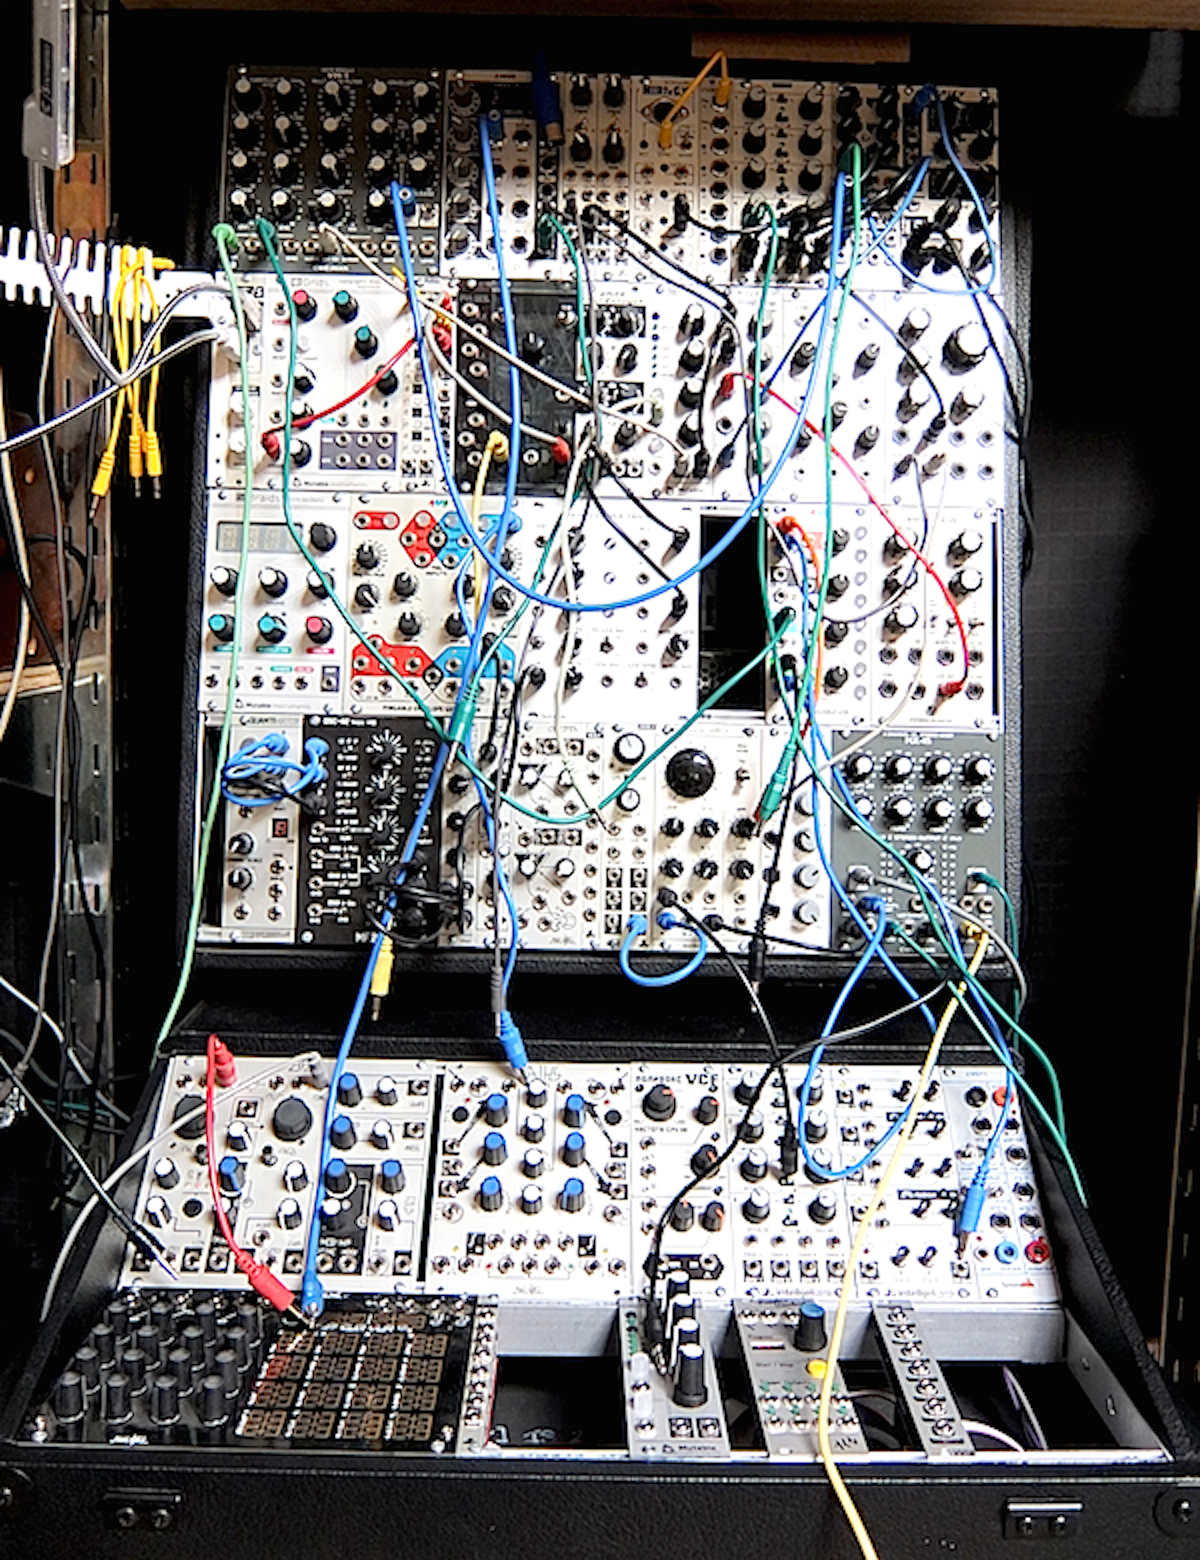 A modular Eurorack synthesizer at Vintage Synthesizer Museum.